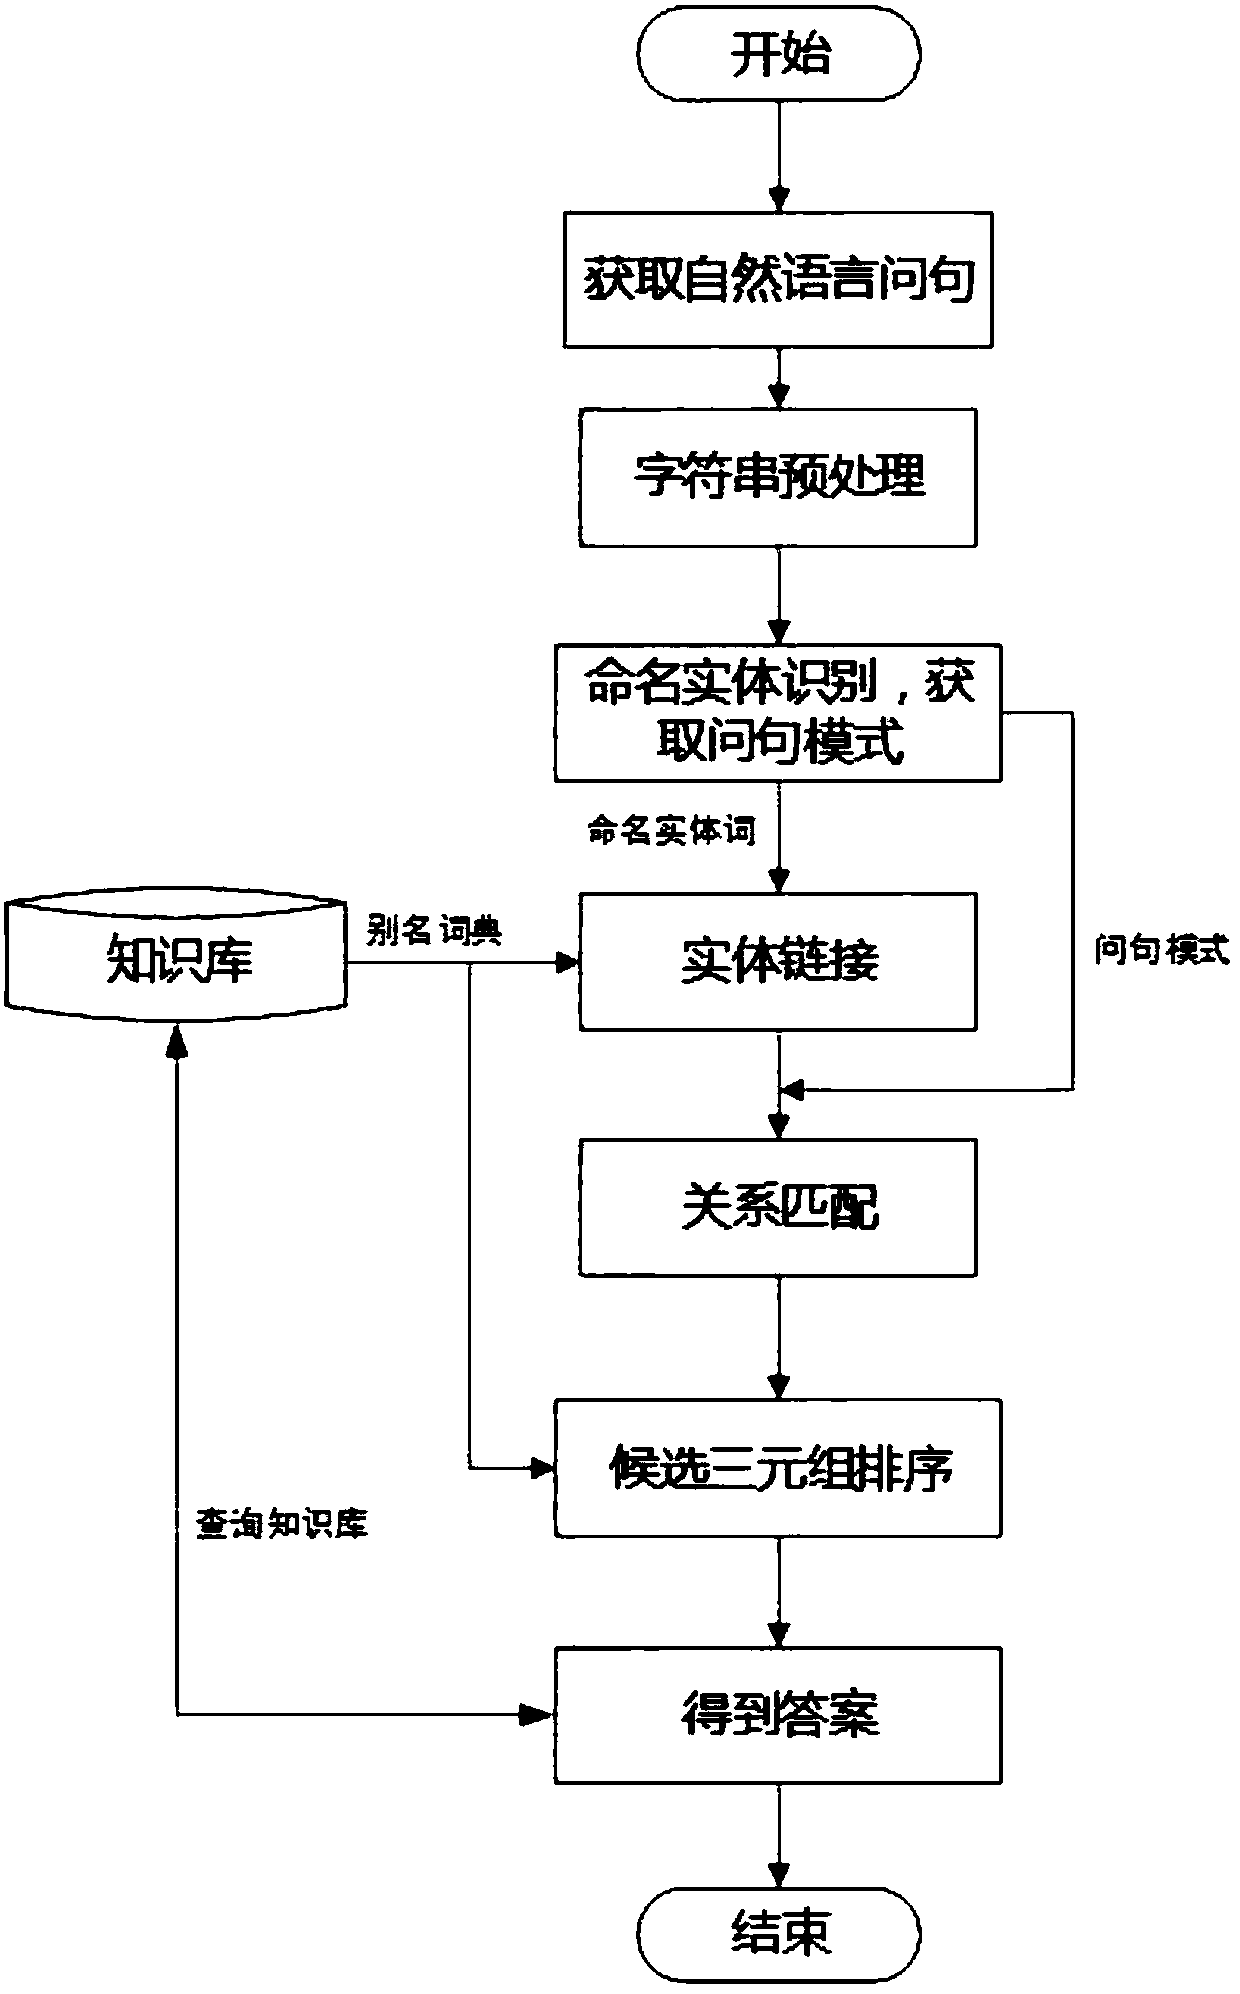 Question and answer method based on knowledge map